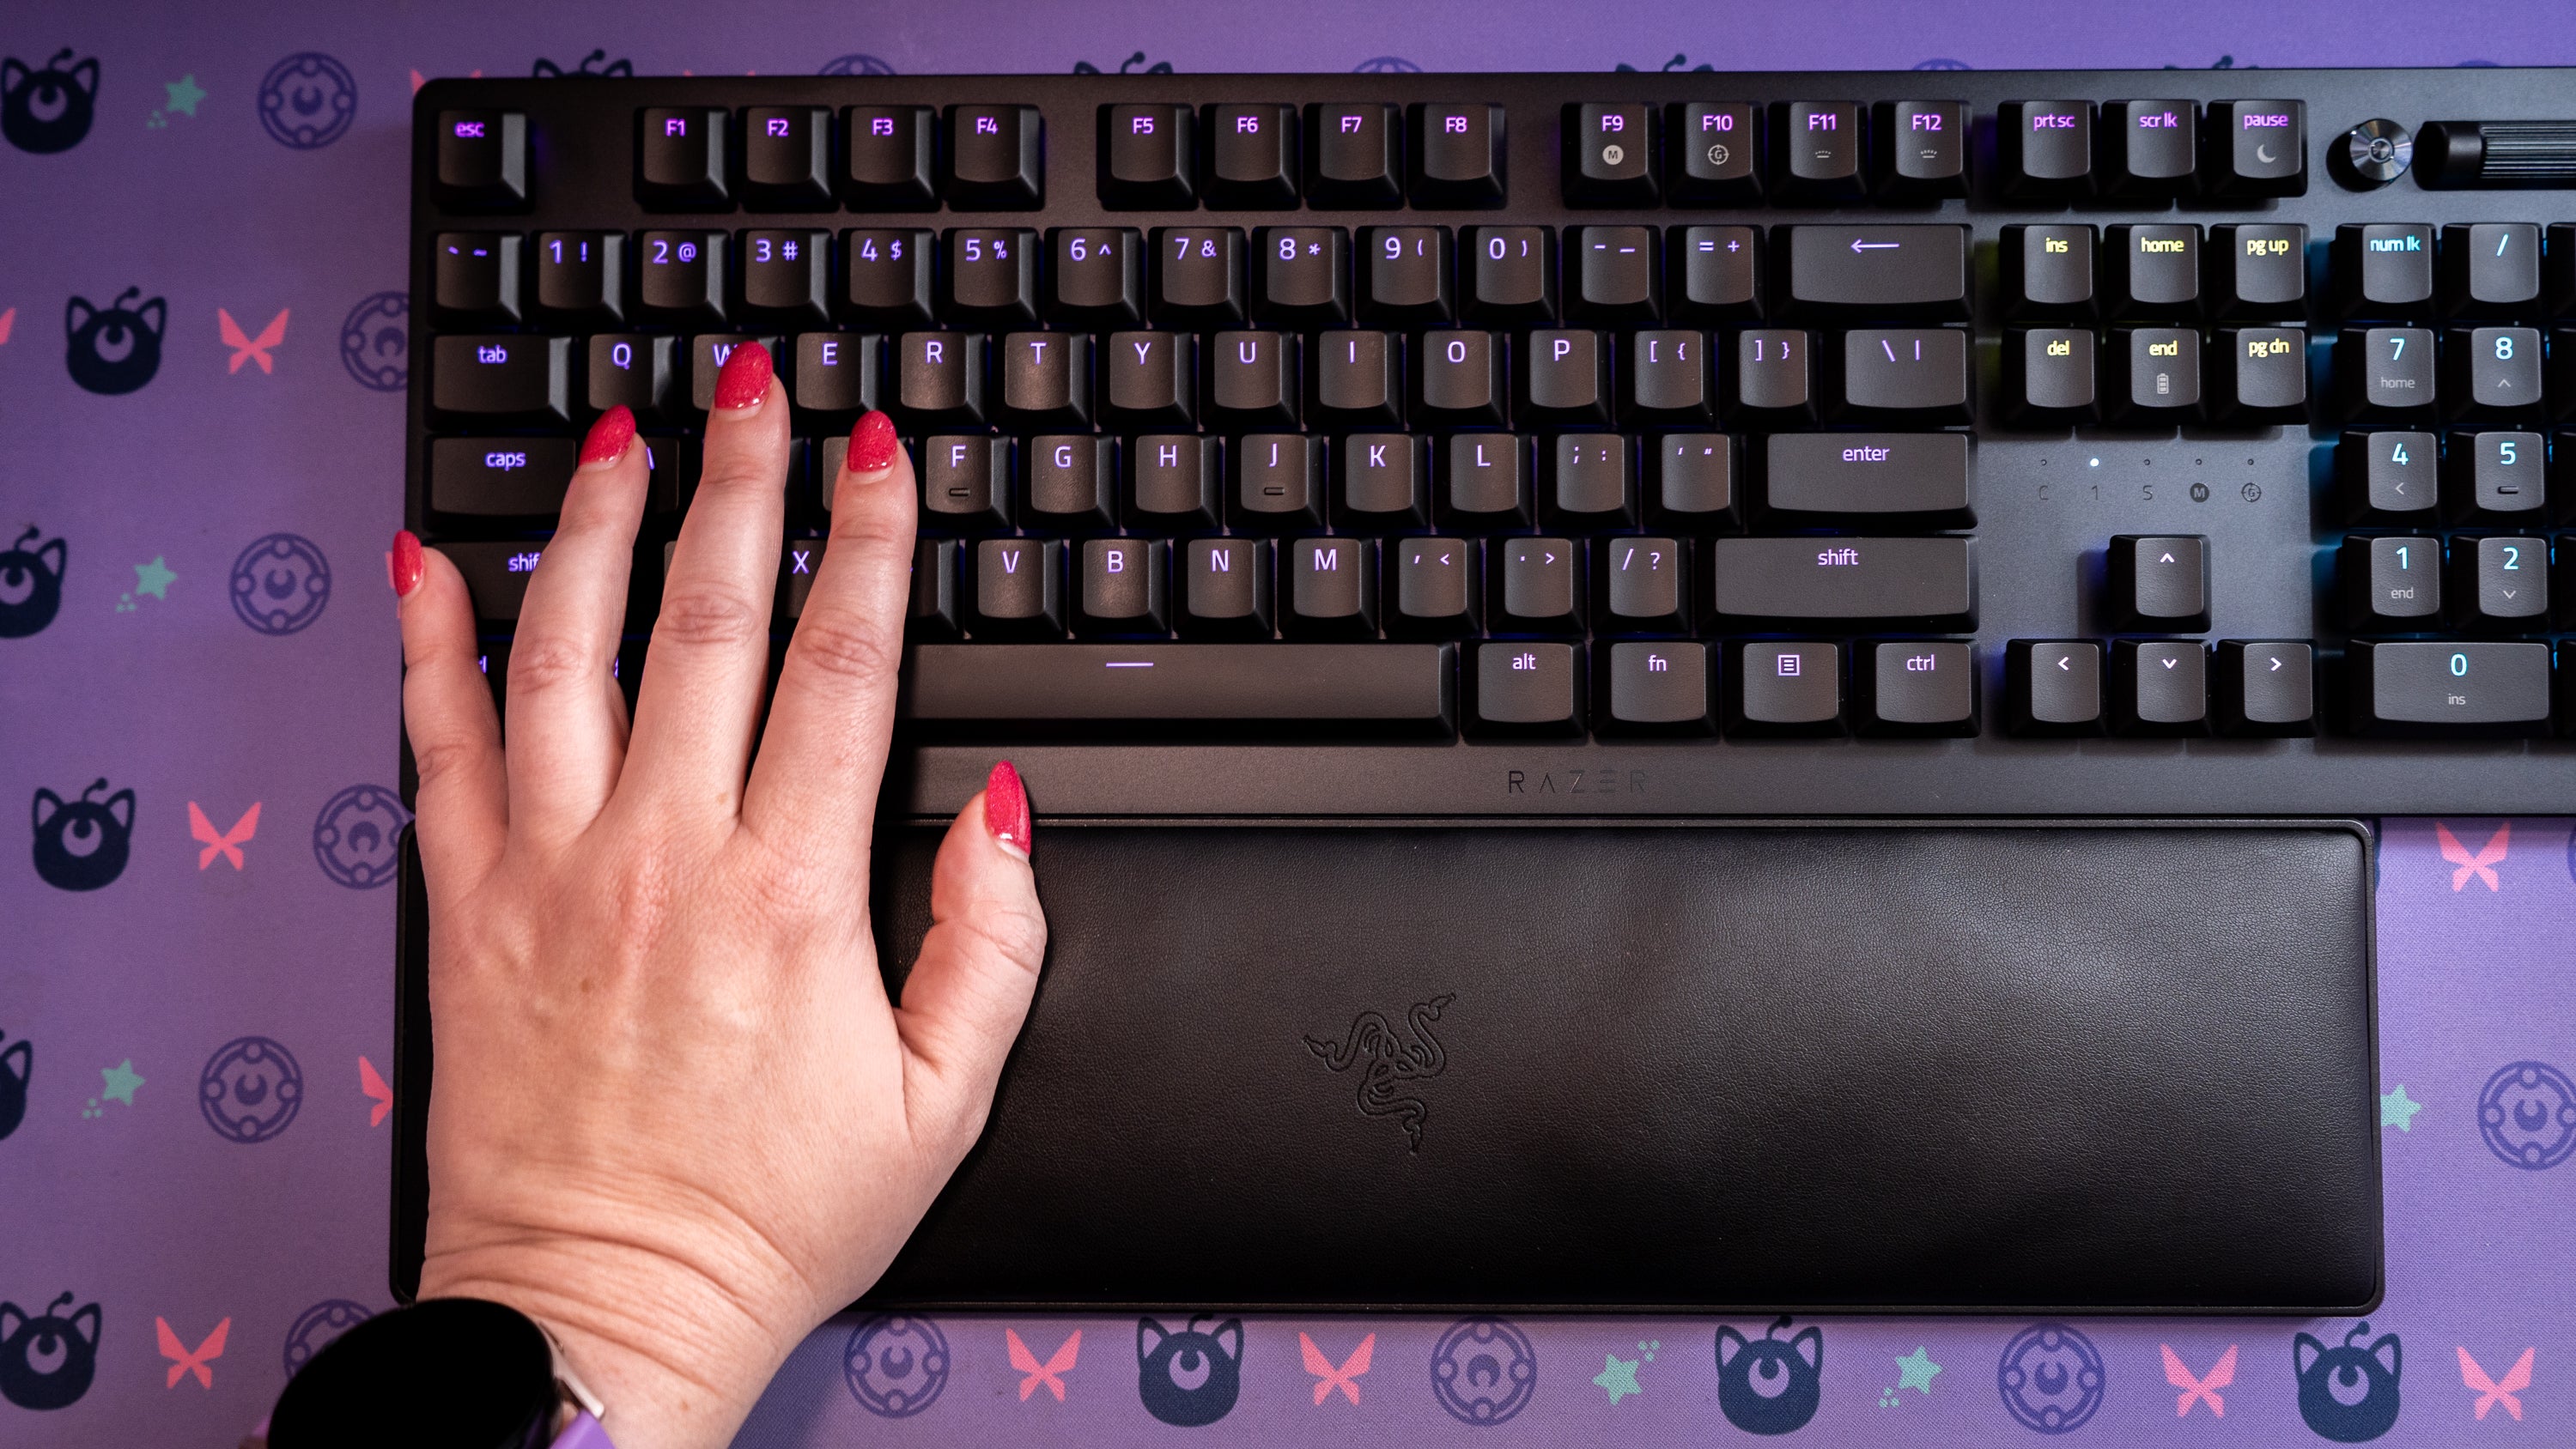 I needed a wrist rest to use this board, but the leather Razer one ended up complicating the typing experience.  (Photo: Florence Ion / Gizmodo)